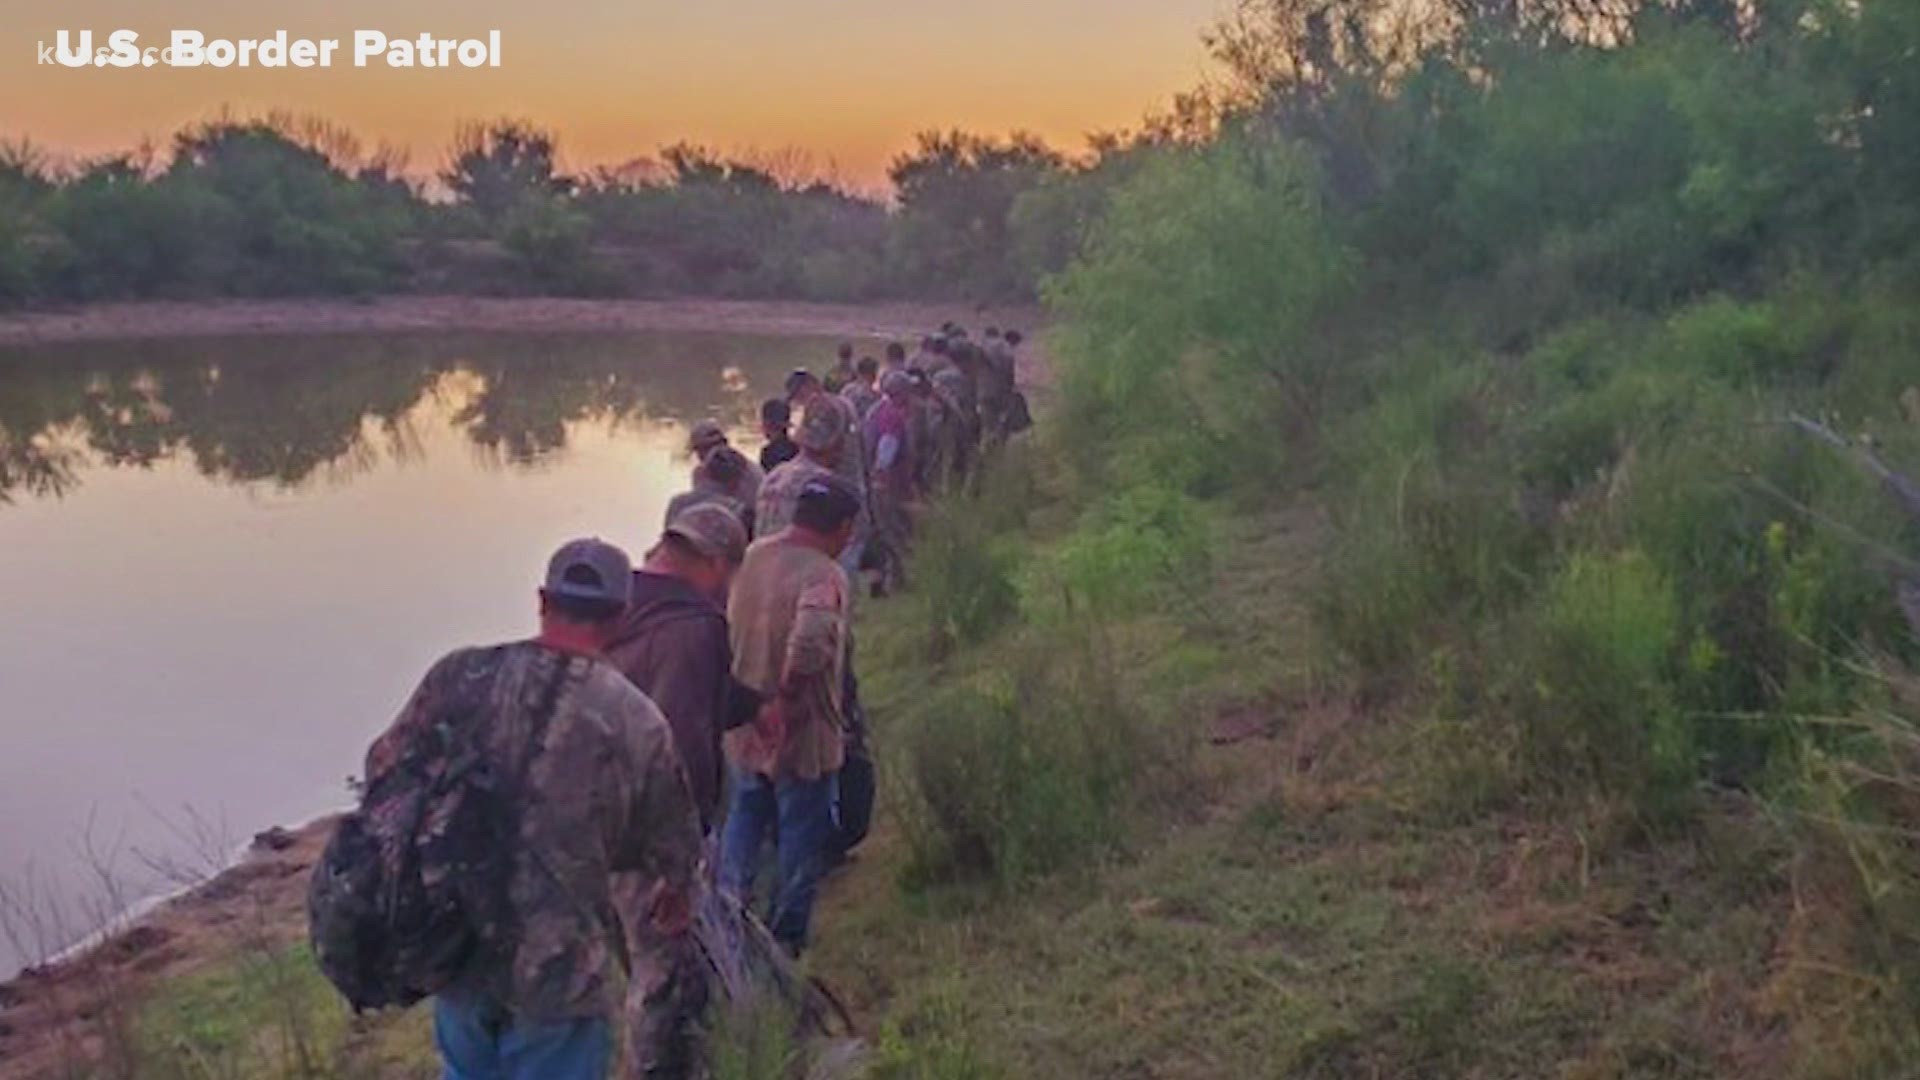 In Del Rio, Border Patrol officials say they are encountering a record number of migrants -- over 1,000 per day.